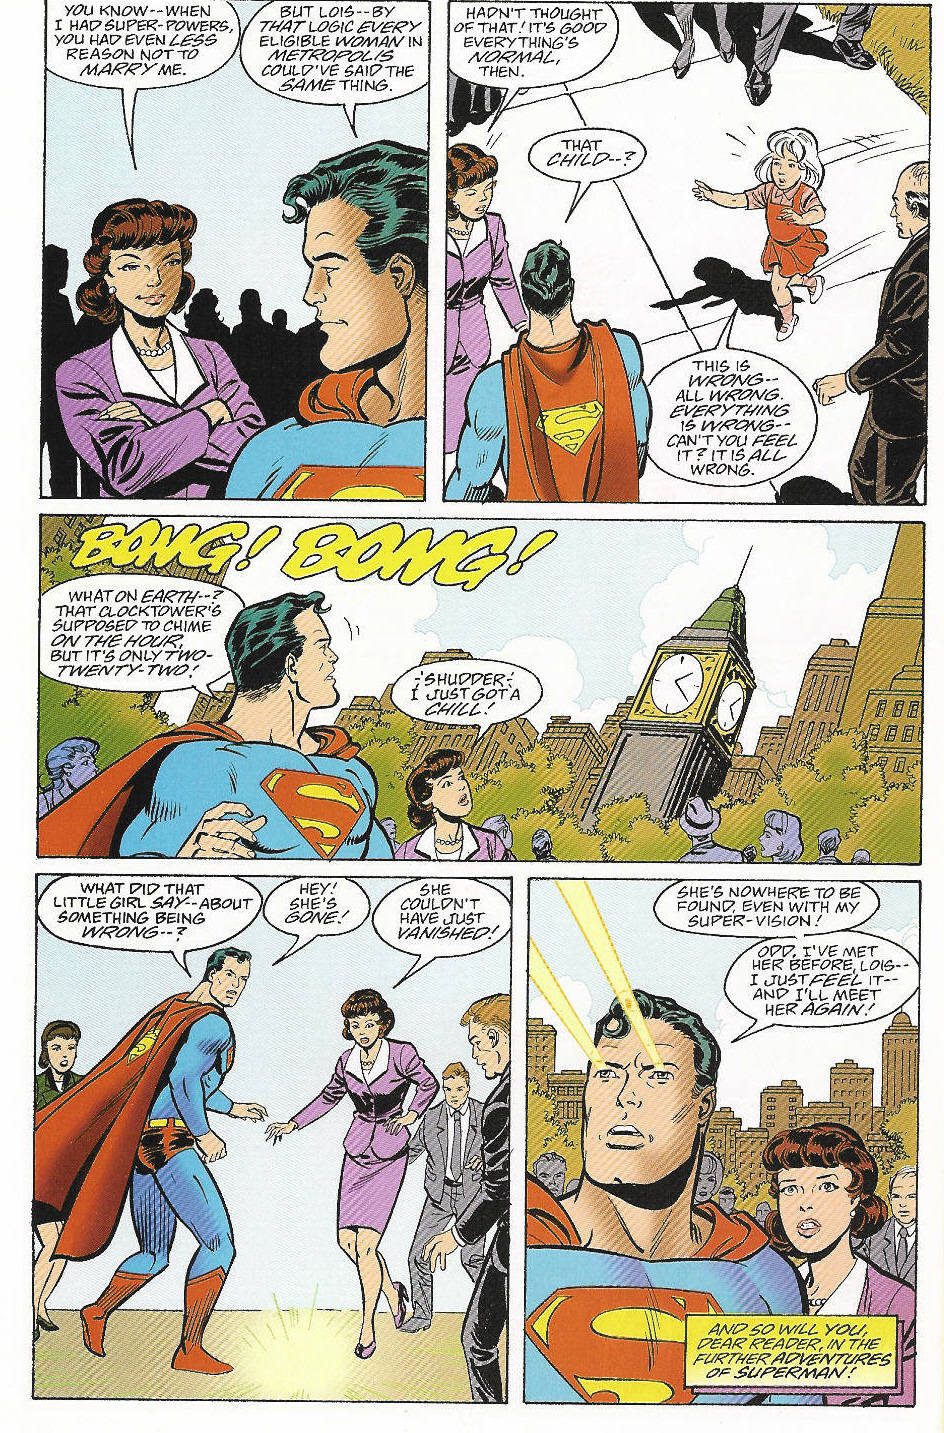 Adventures of Superman (1987) 559 Page 22